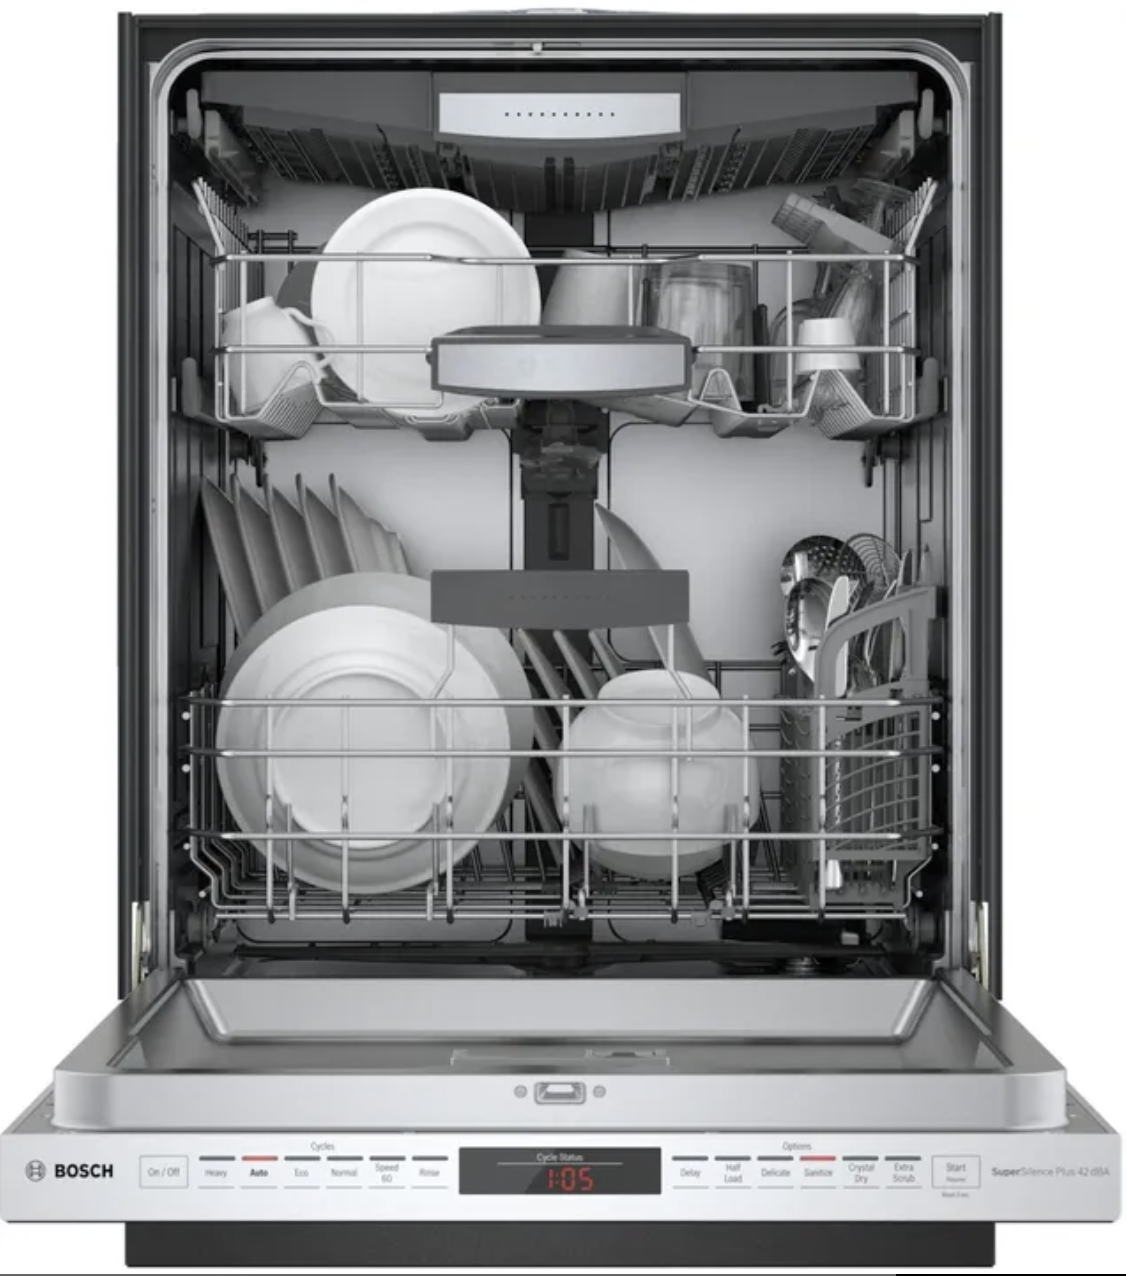 Which Dishwashers Dry Your Dishes Best?